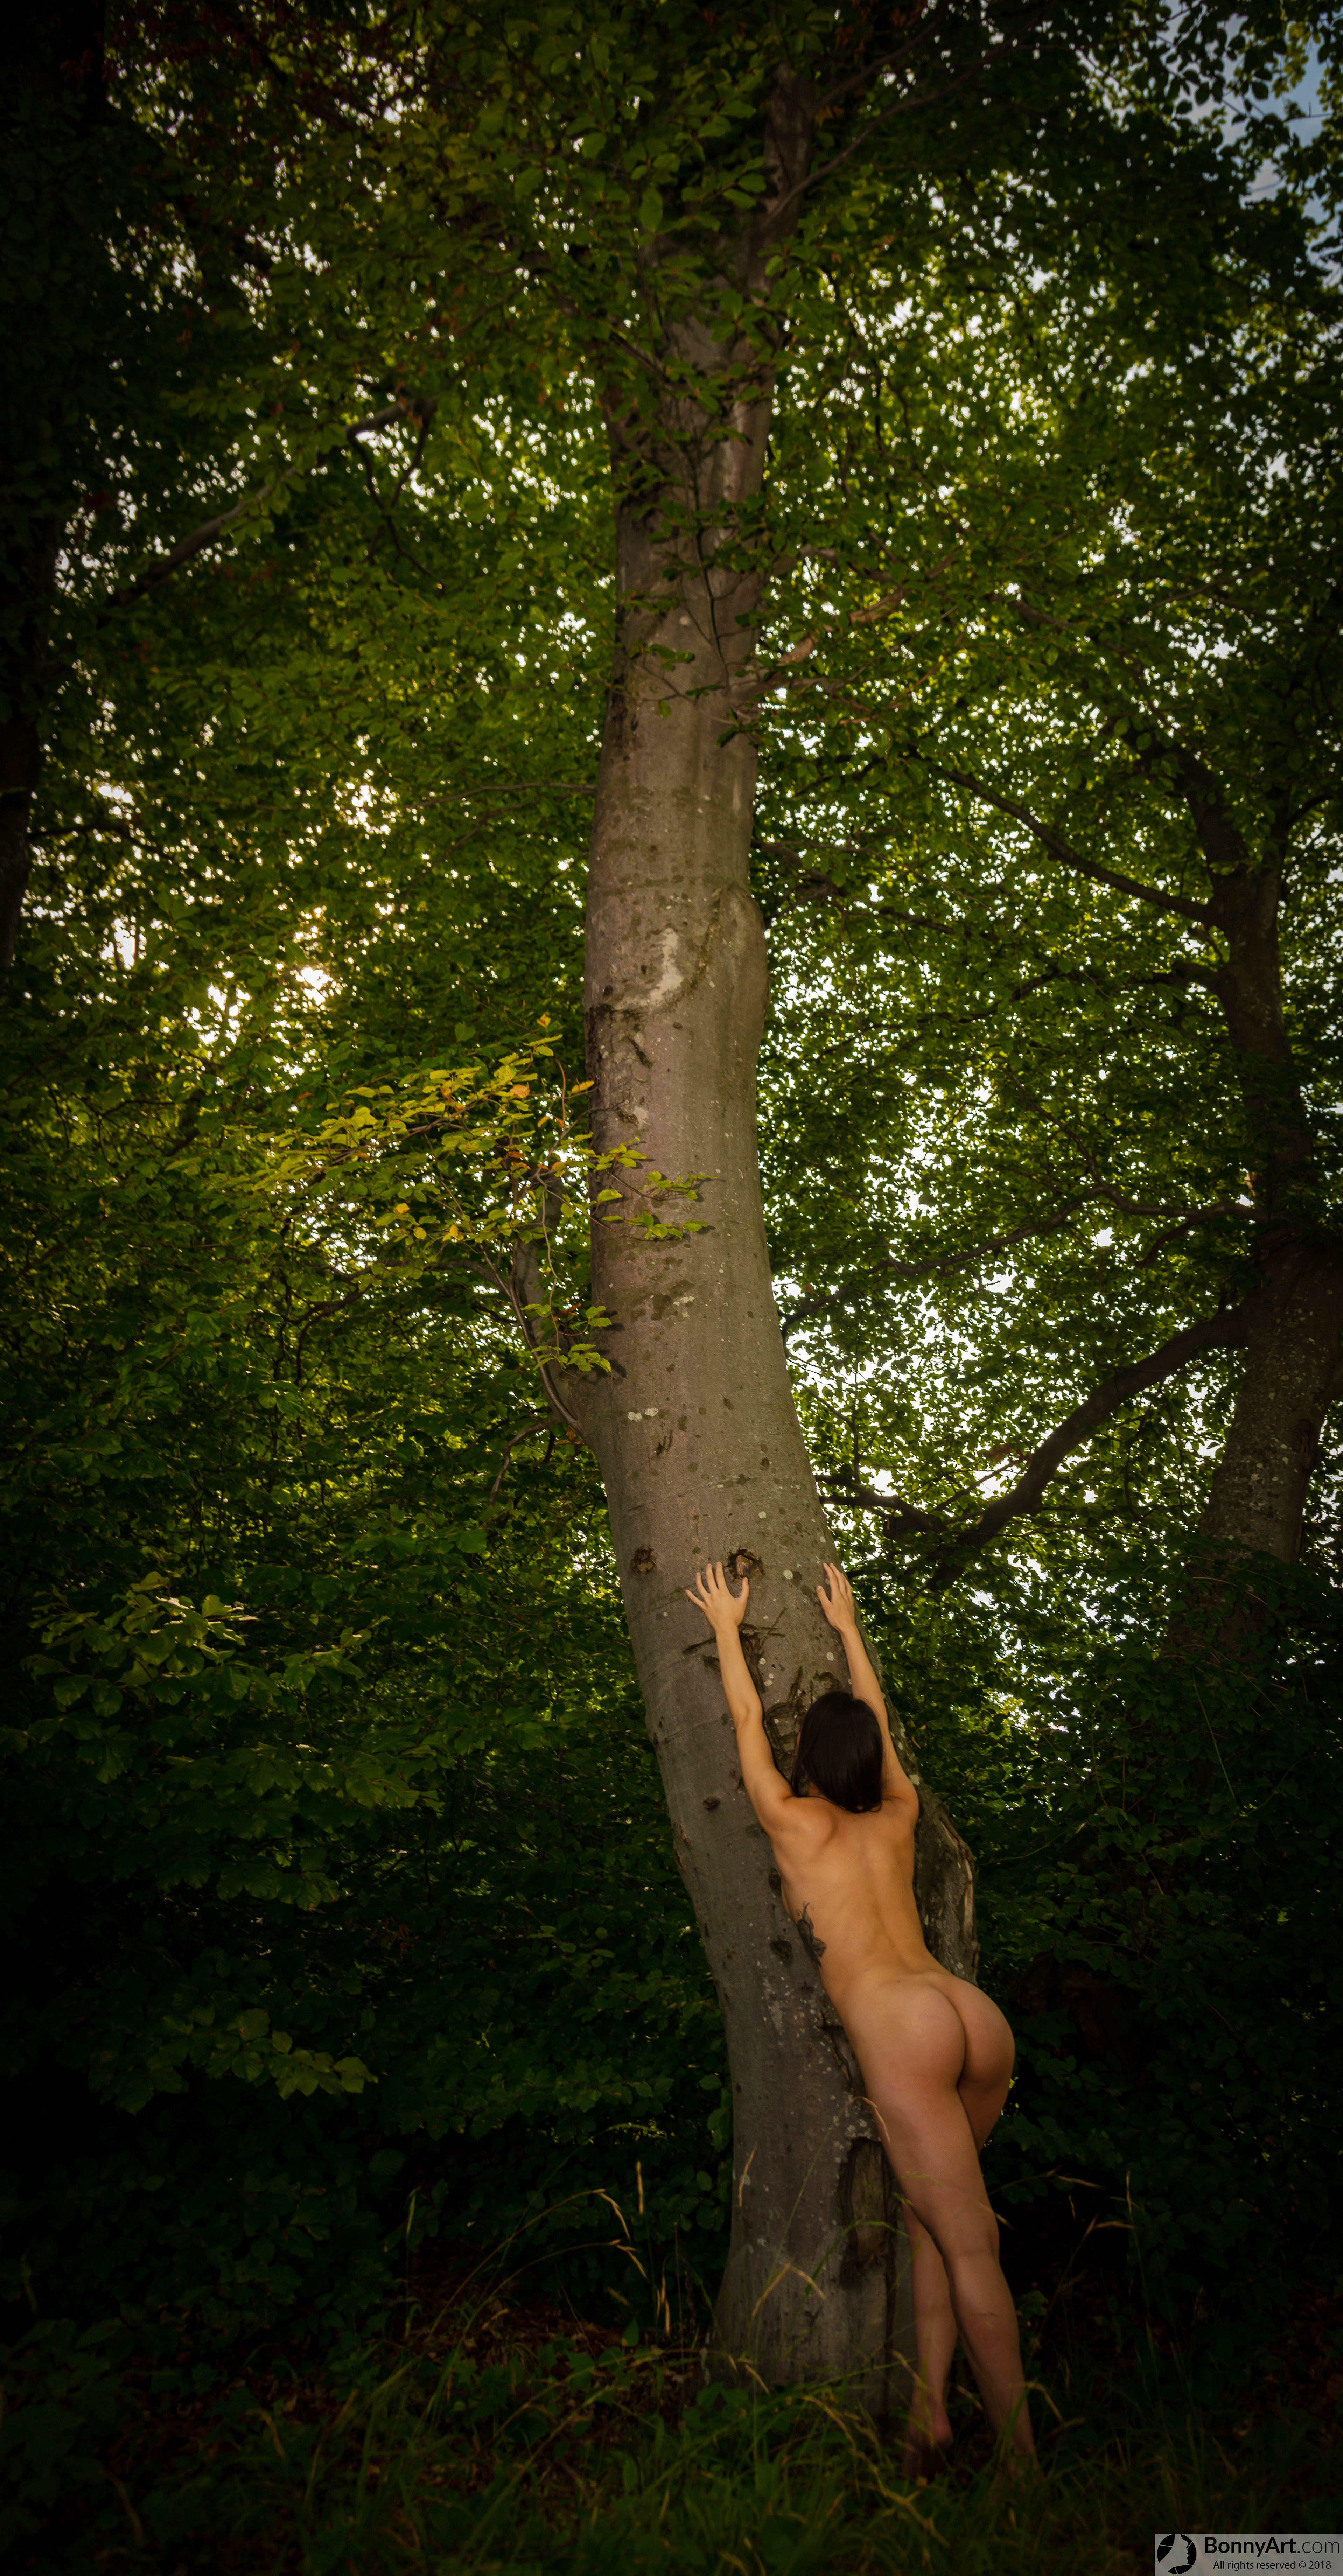 Nude Girl In Forest